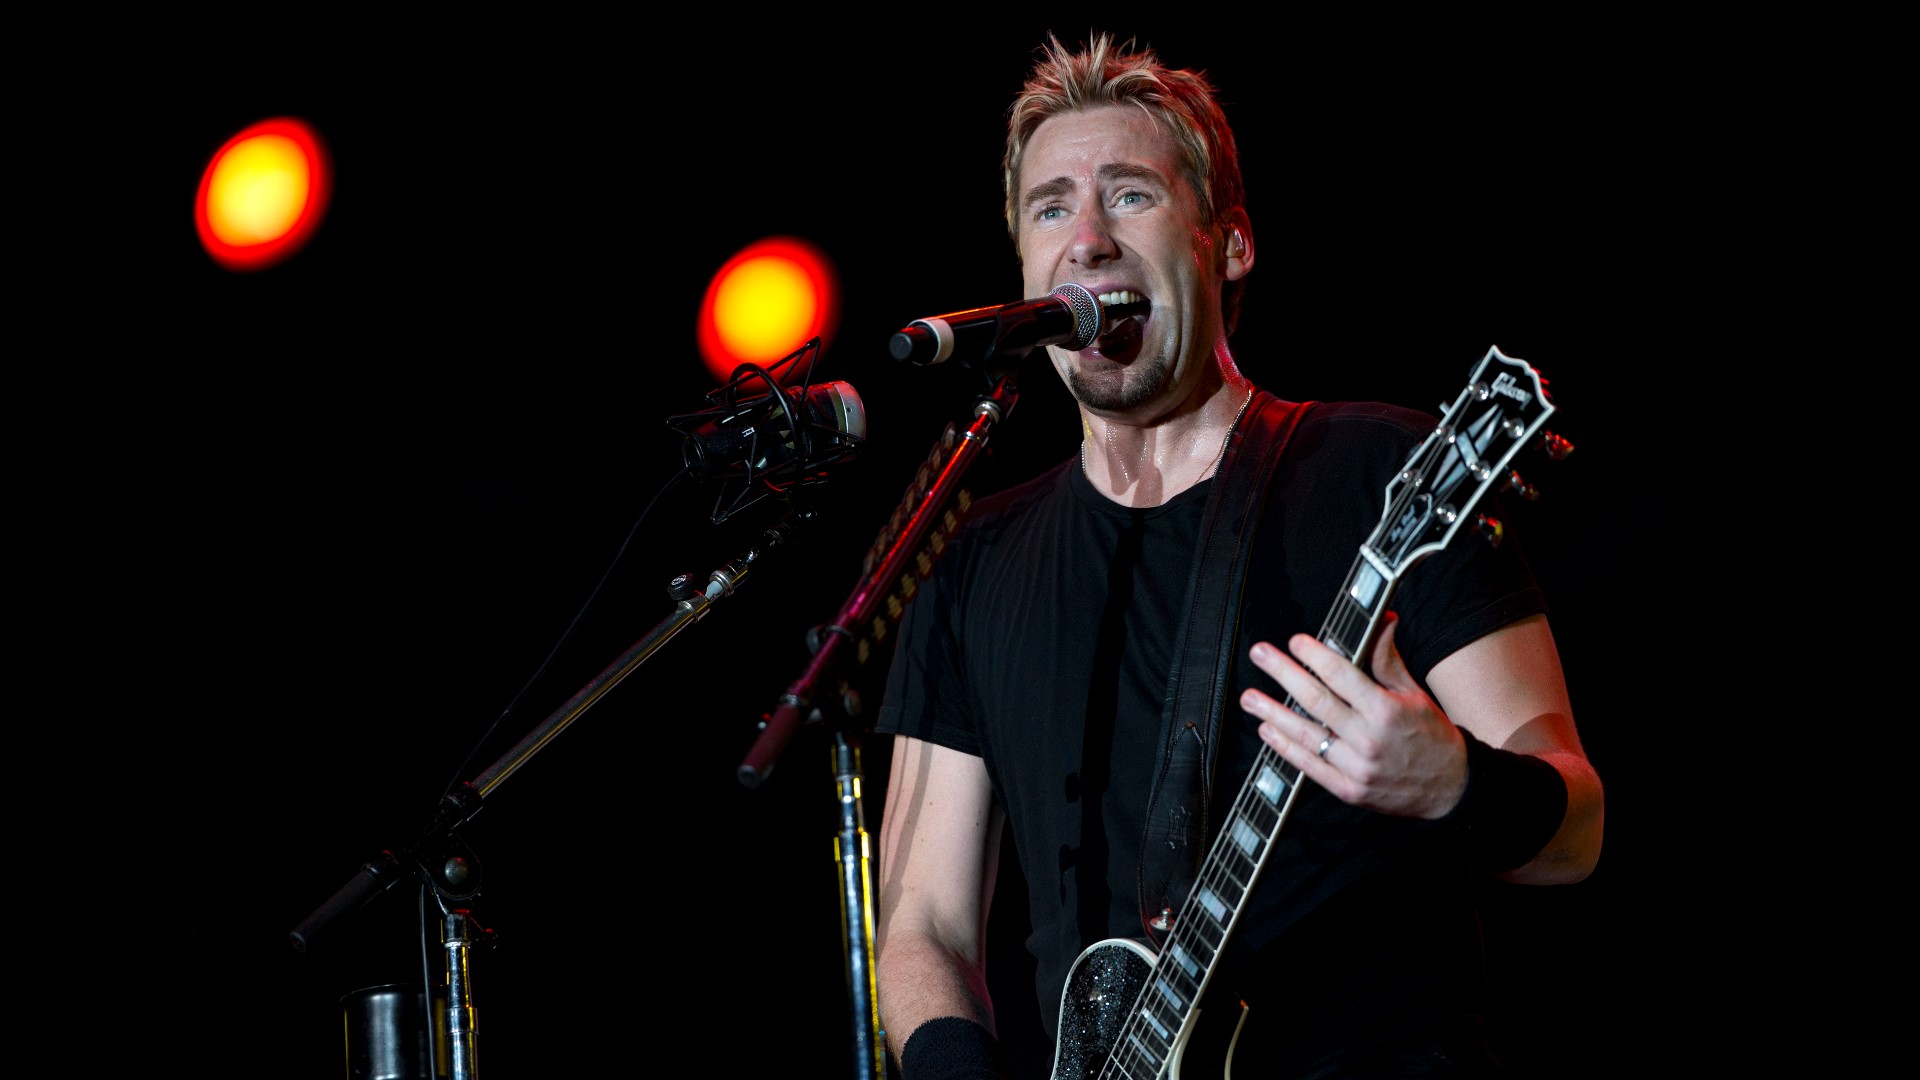 13News Now speaks with two members of the rock band Nickelback ahead of their Virginia Beach concert on September 2, 2023.